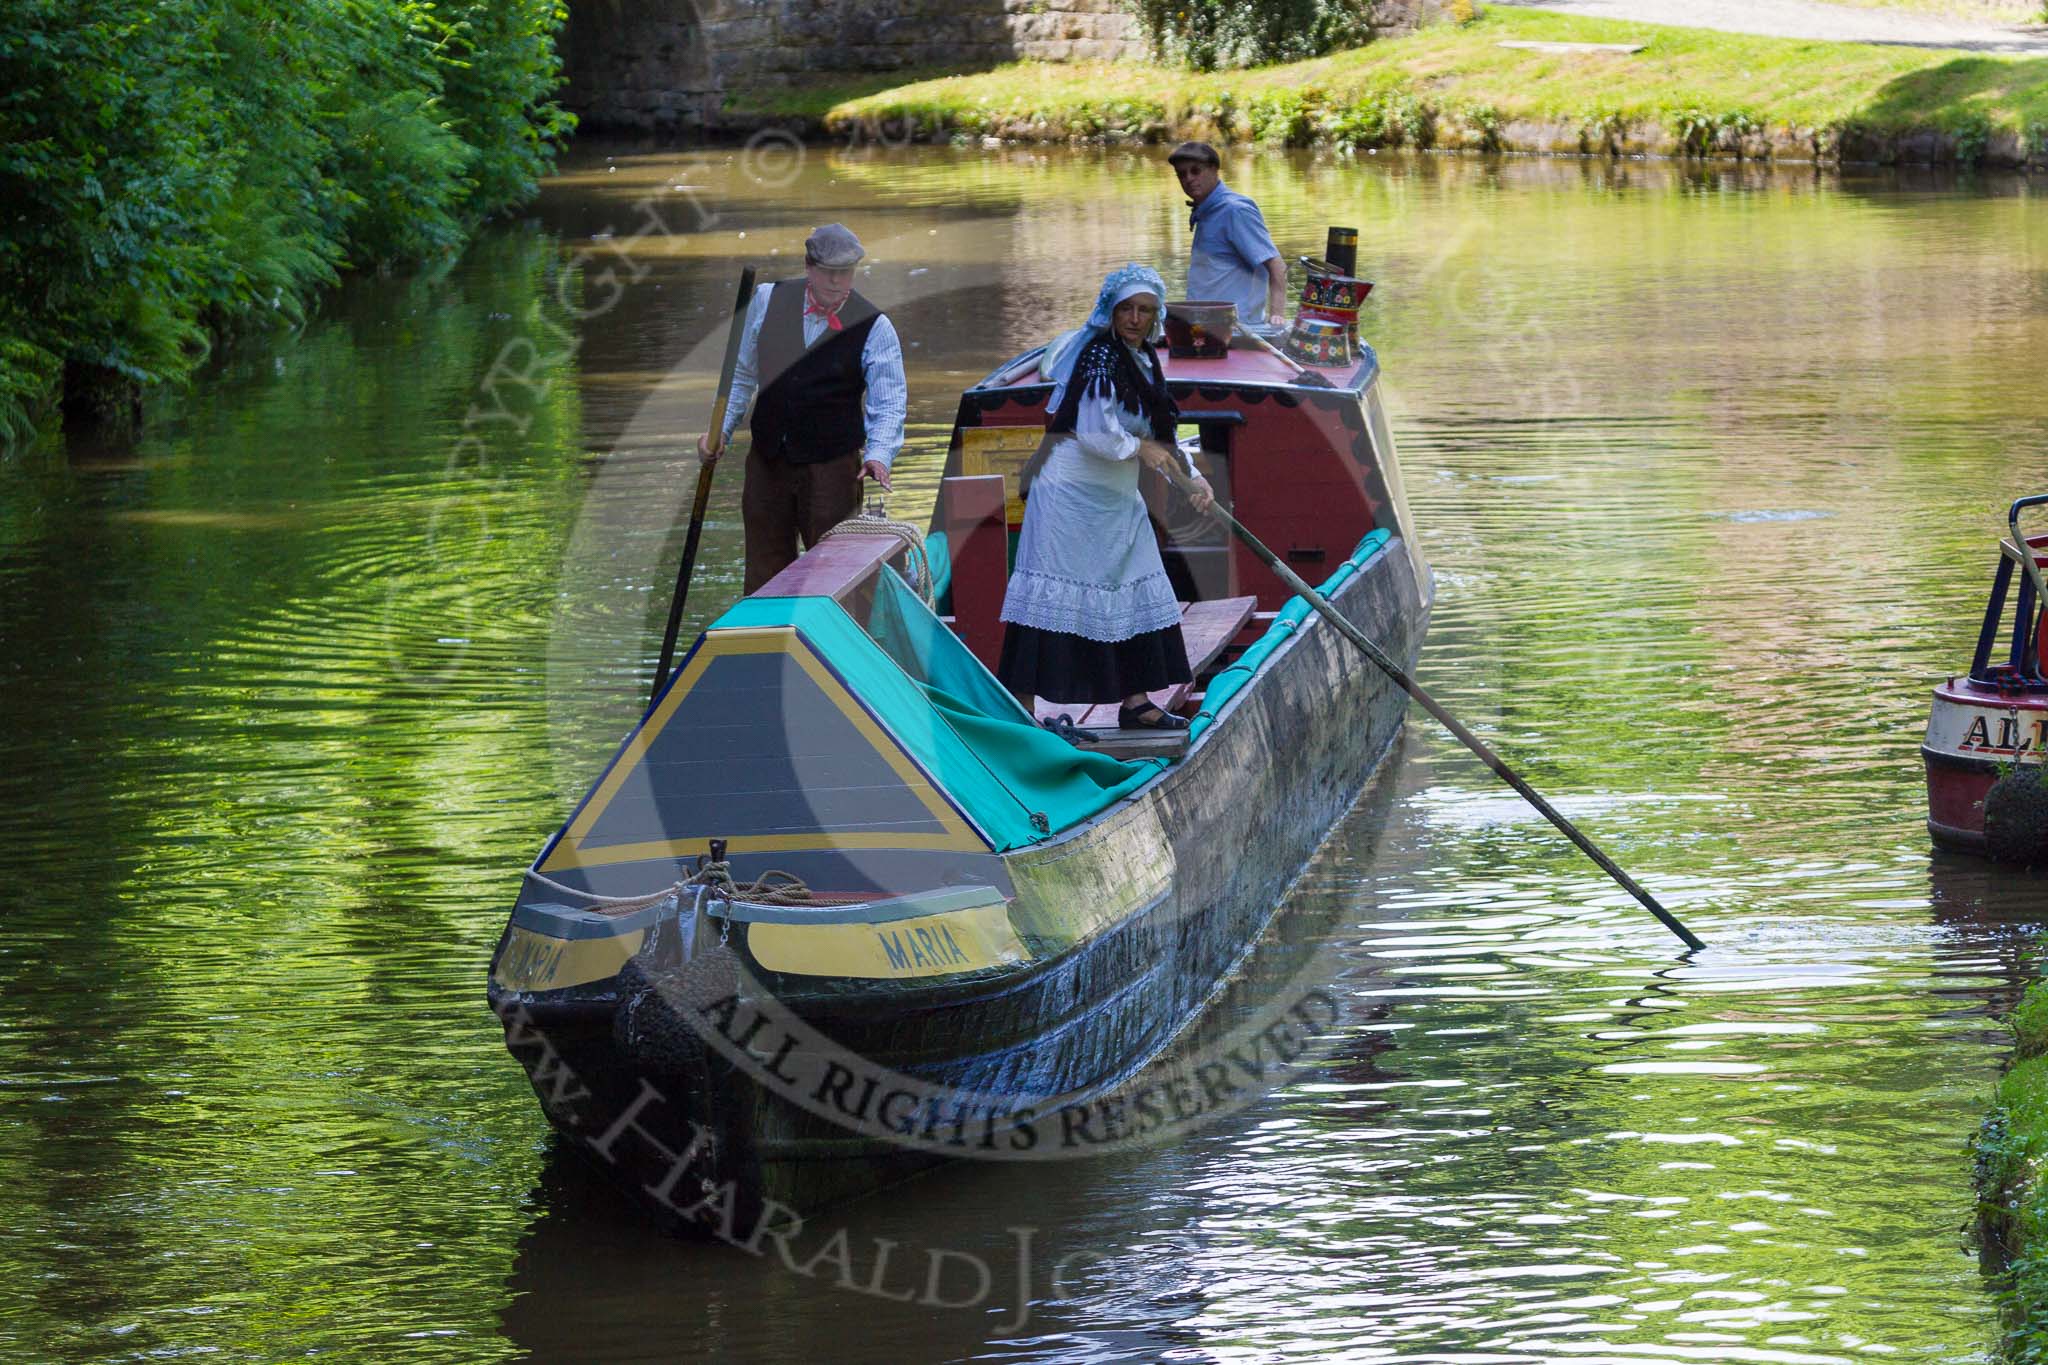 : Historic narrowboat is poled towards Marple bottom lock. Without an engine it's either the momentum or manual work that moves the boat into a lock, once the tow line has been released..




on 03 July 2015 at 15:19, image #29